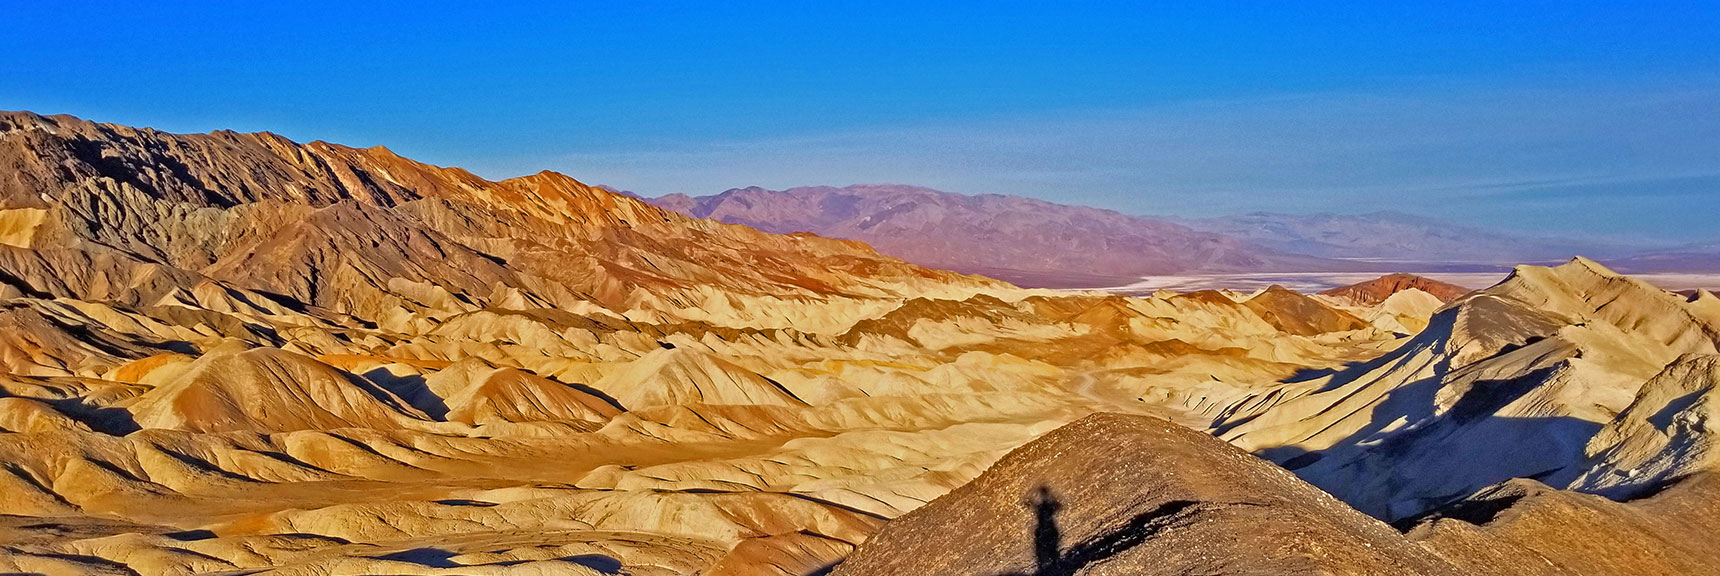 View Northwest Beyond Canyon to Death Valley and Panamint Range. | Twenty Mule Team Canyon | Death Valley National Park, California